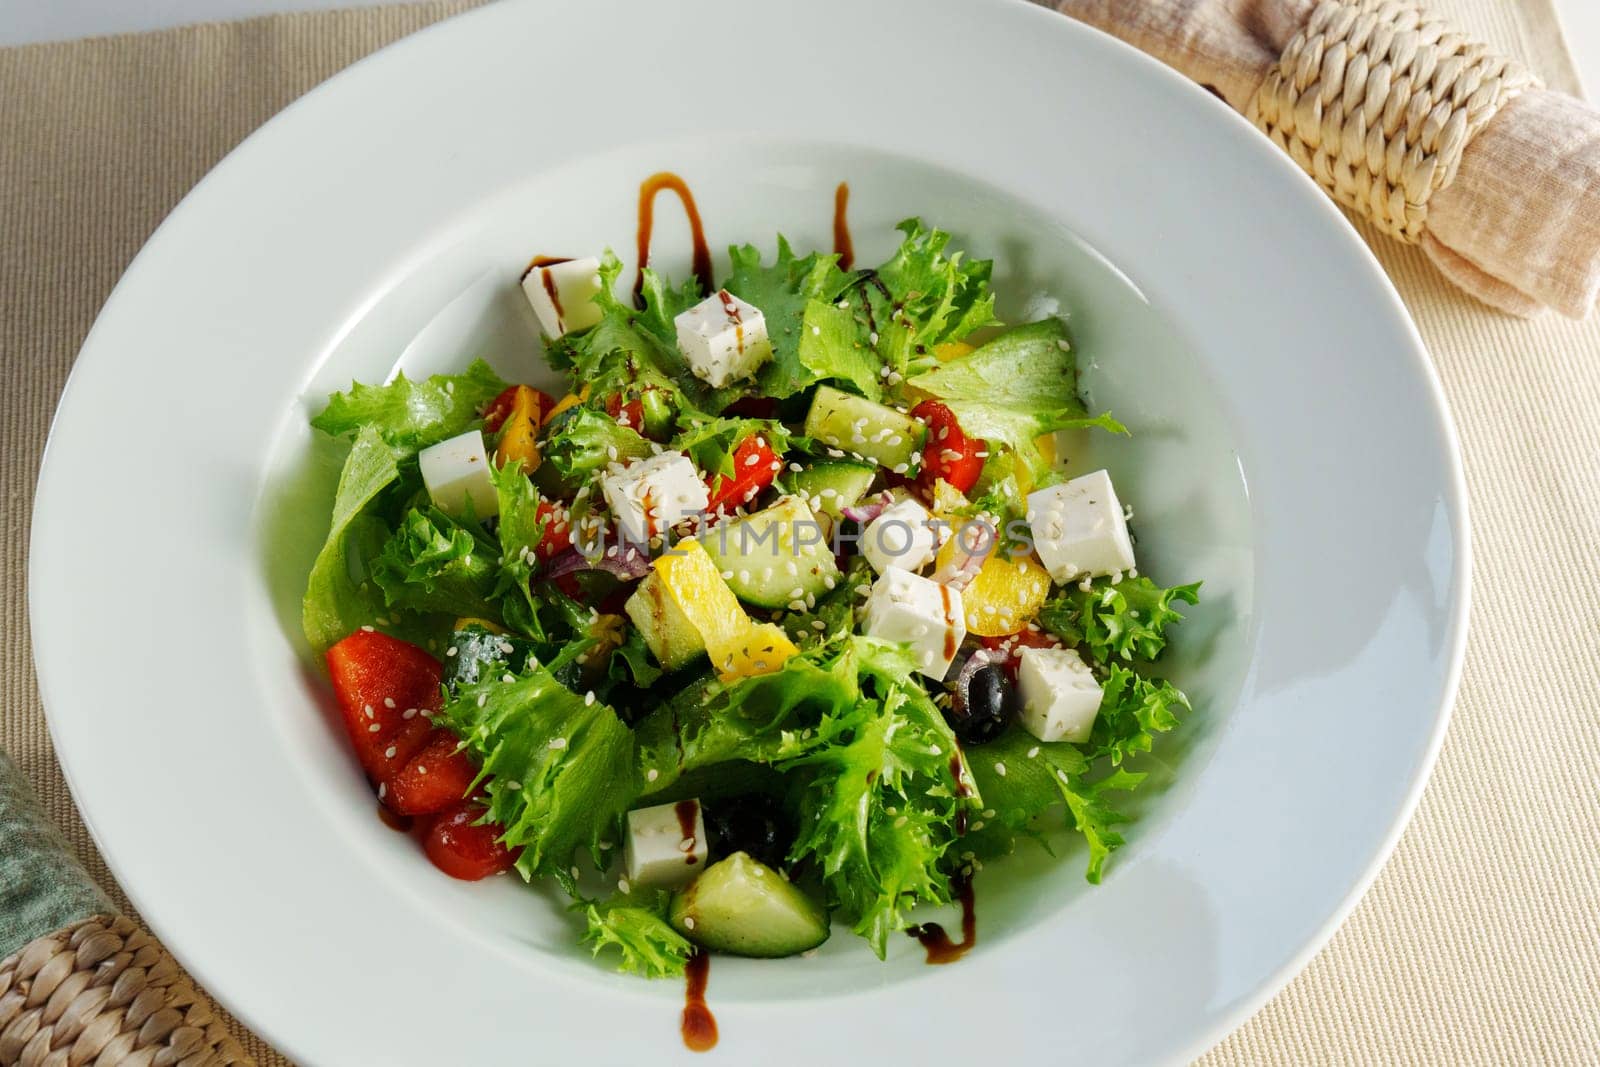 Crisp Refreshment: A Savories Salad Cascading With Zesty Dressing on a Gleaming White Plate by darksoul72